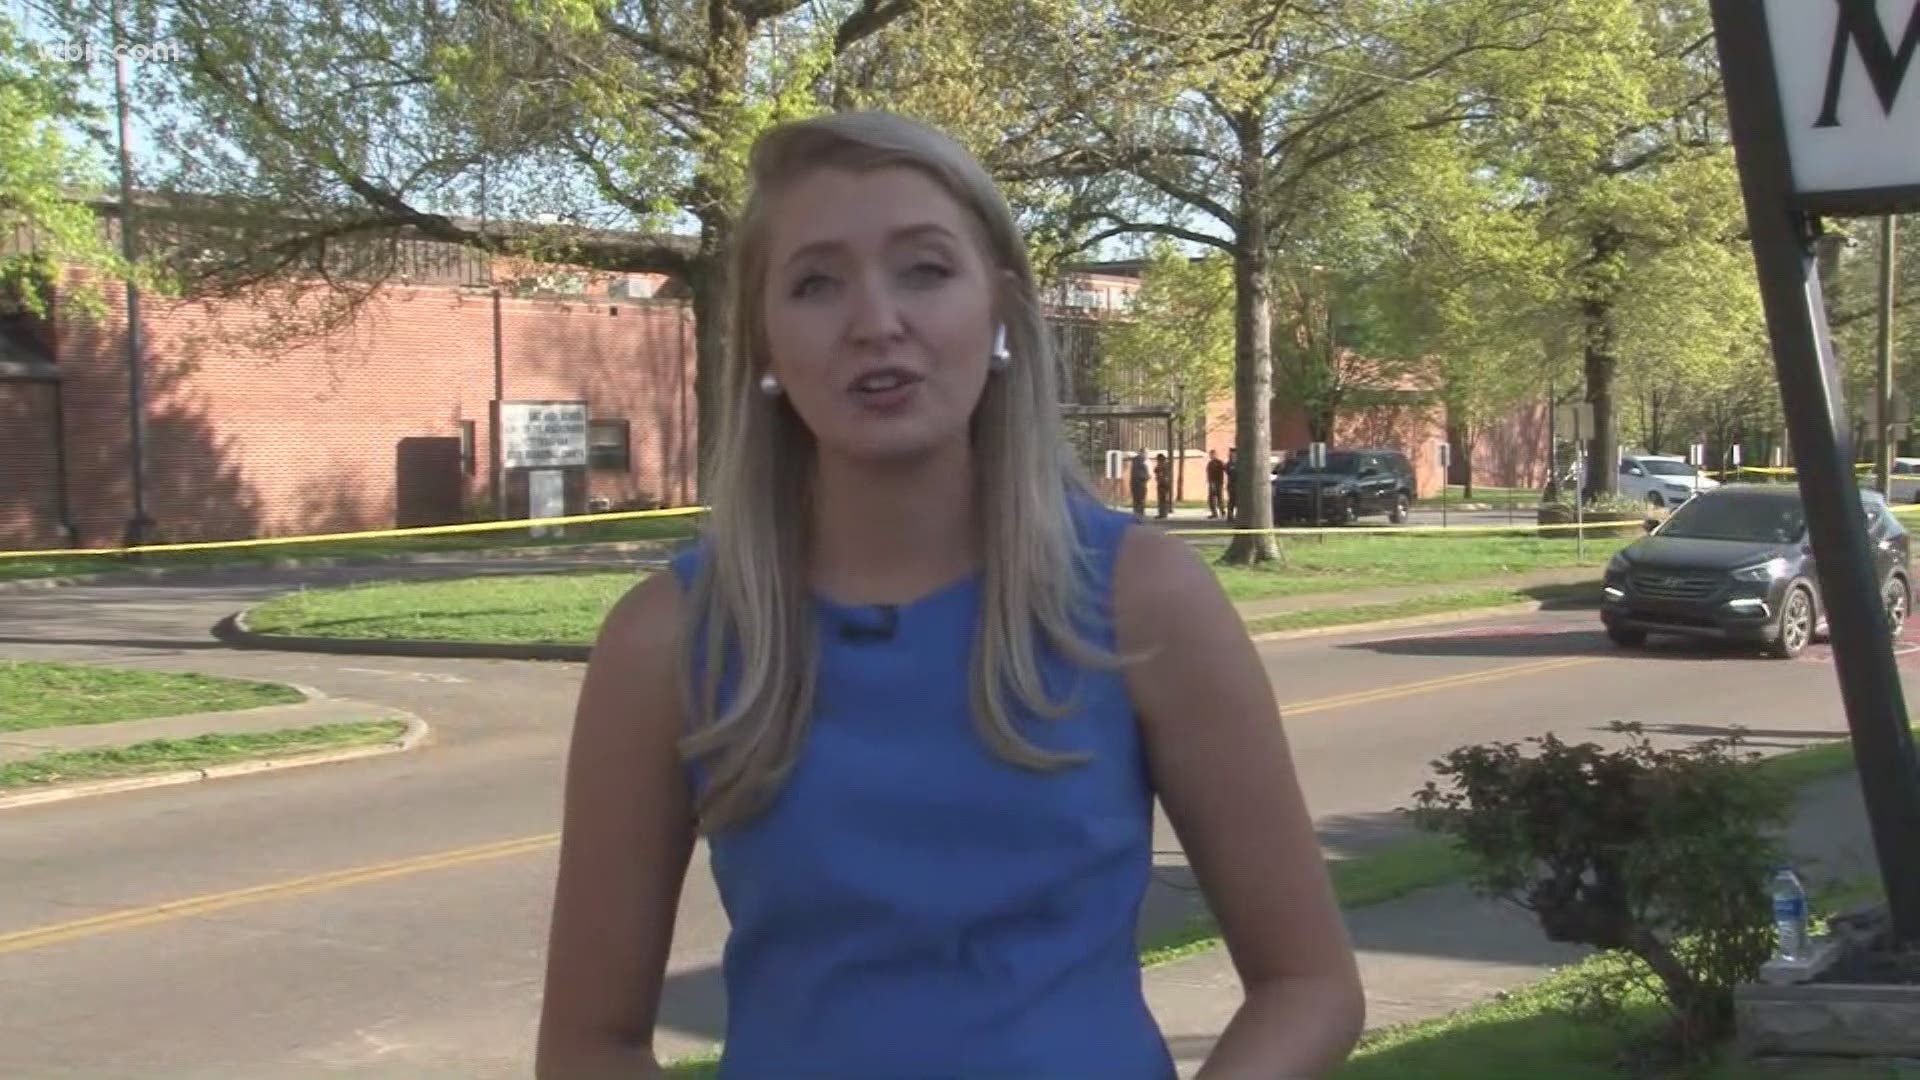 10News Reporter Katie Inman spoke to some people that gathered in front of the school who described what they saw after gunshots rang out.